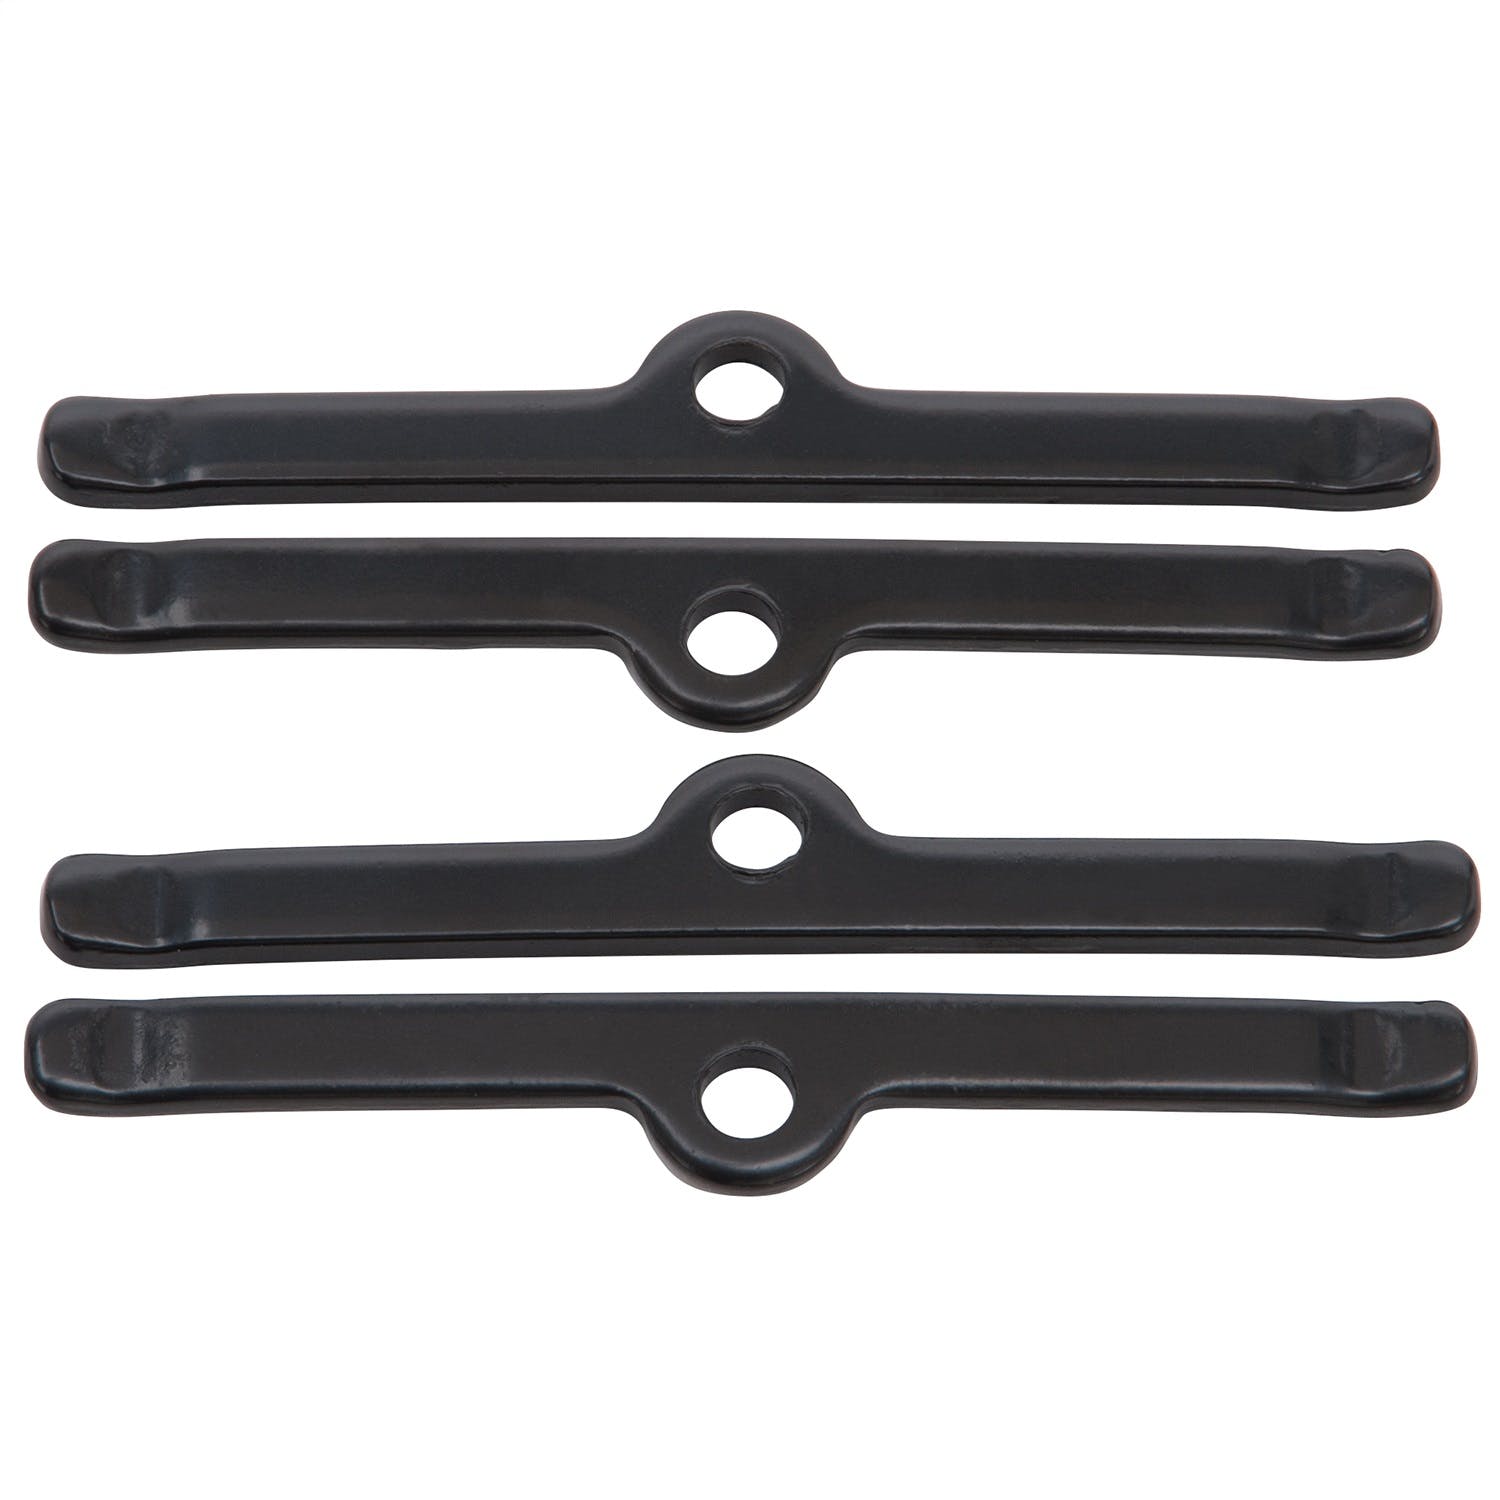 Edelbrock 44263 Hold-Down Tab Kits for Small-Block Chevy 5 long in Black Finish (Qty 4)